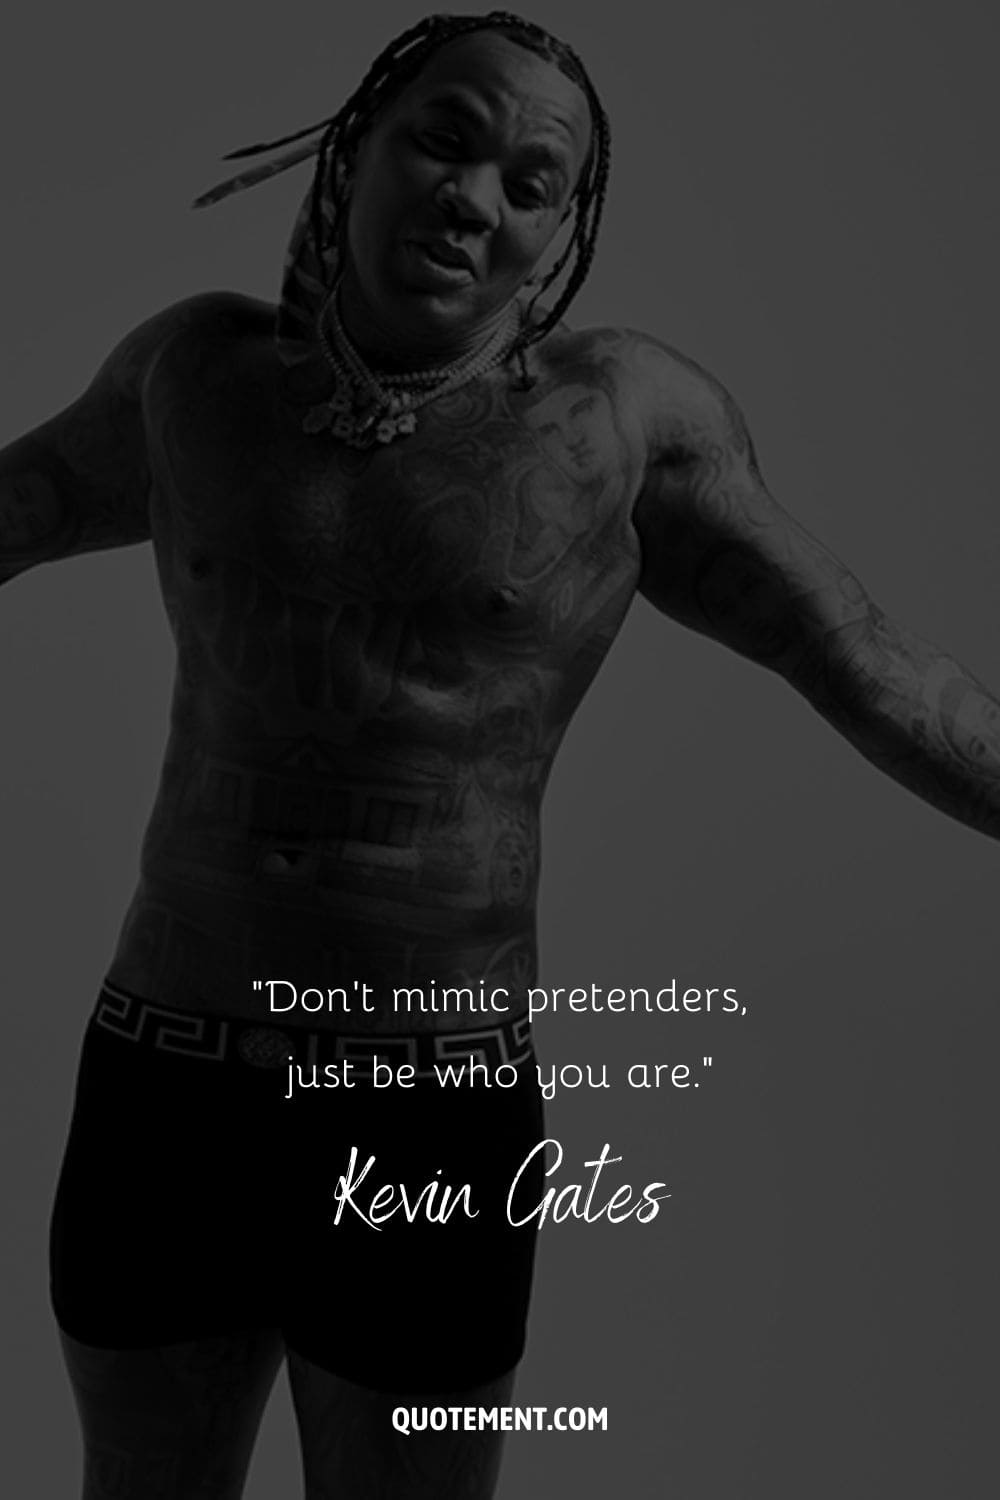 “Don’t mimic pretenders, just be who you are.” – Kevin Gates